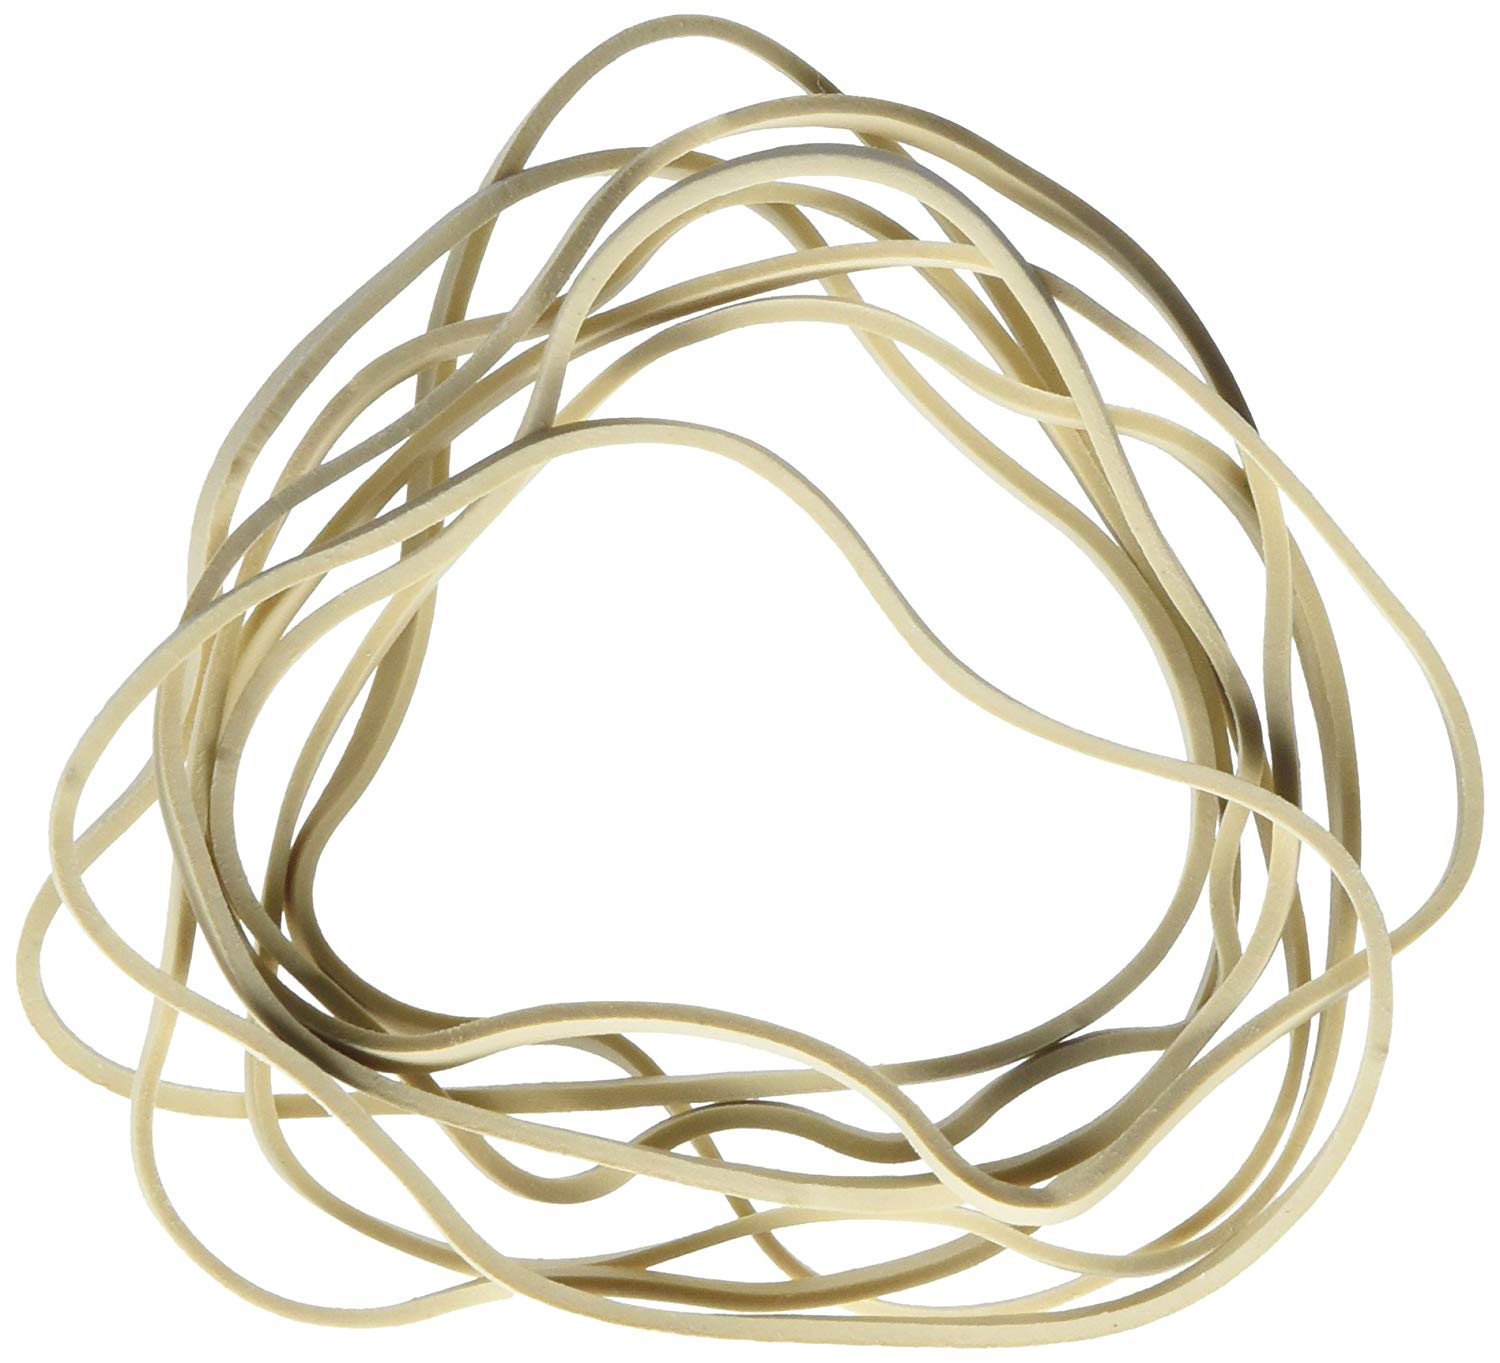 How Much Energy Can You Store in a Rubber Band?